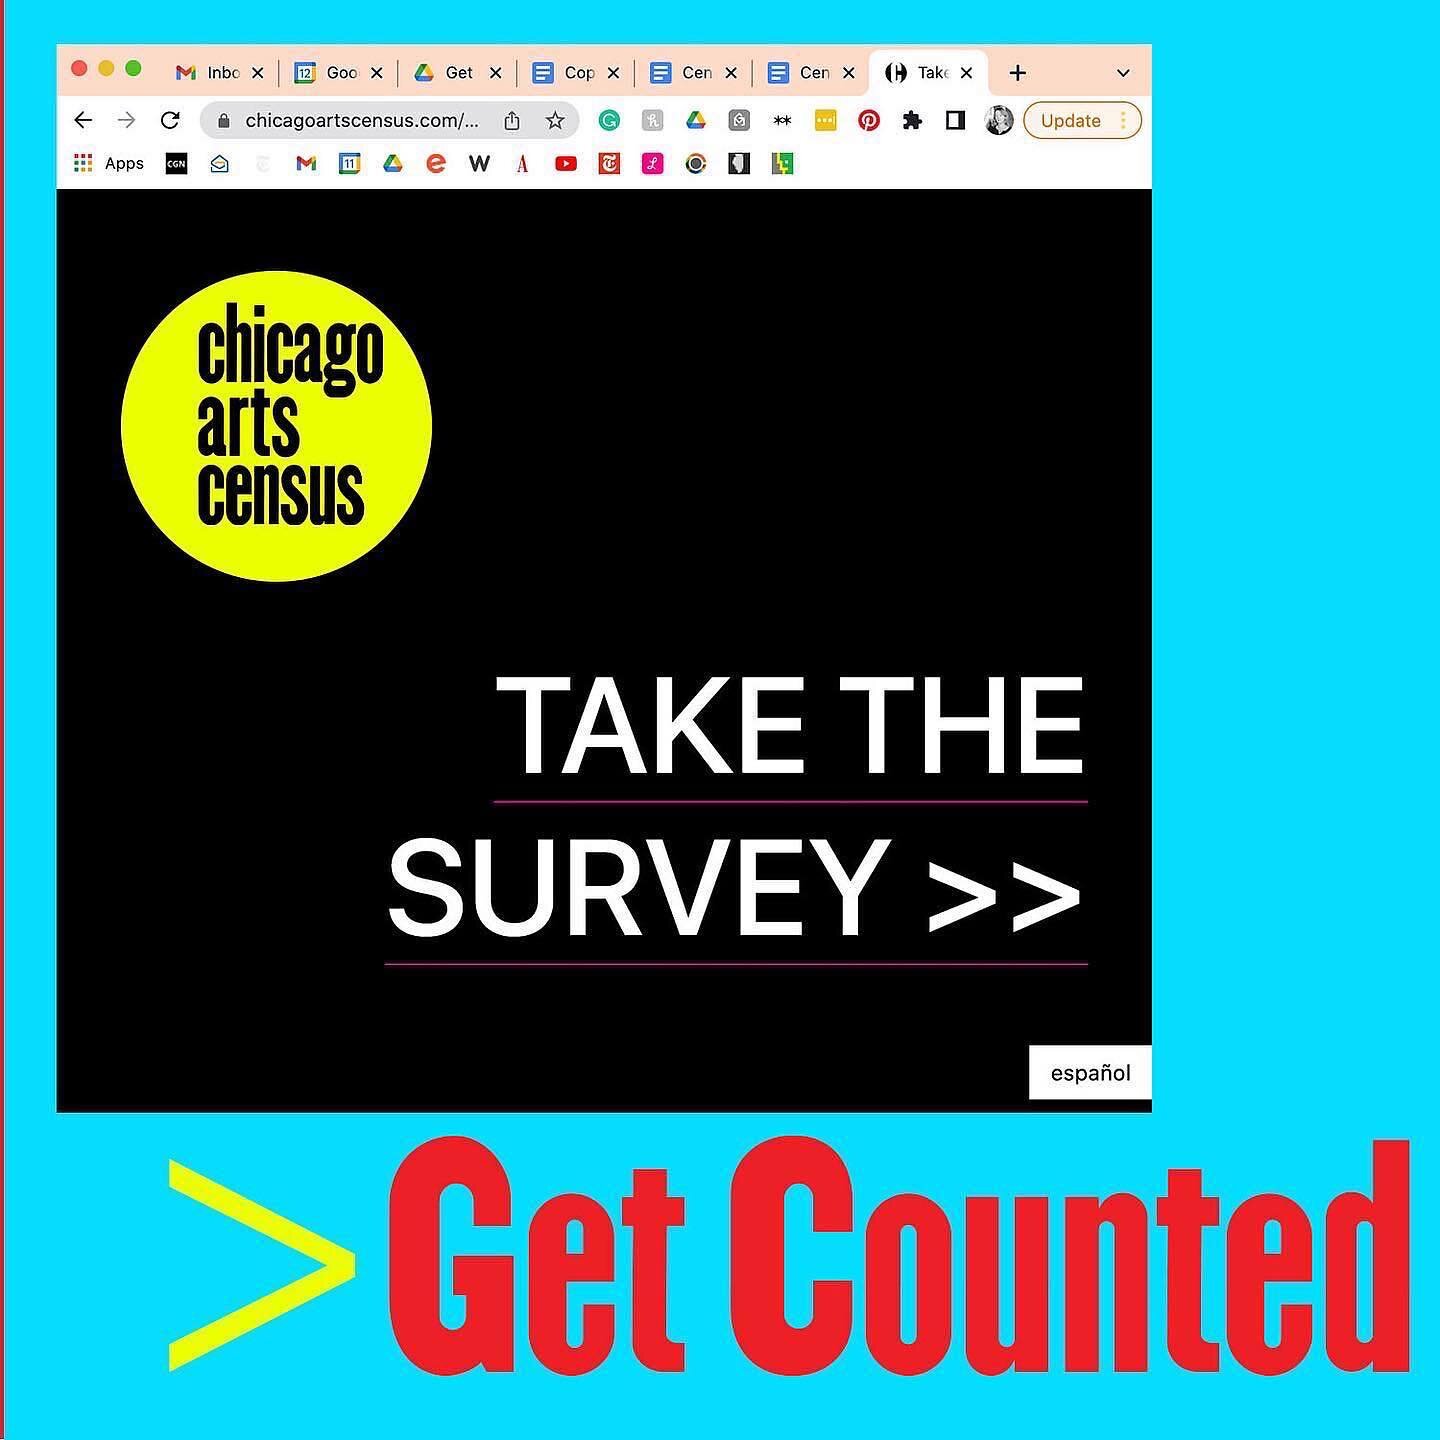 🚨Today is the last day to add your voices to the first data report on the lives and livelihoods of Chicago arts workers! 🚨

Follow the link in our bio to take the survey! Even a half completed survey is important to this work. So, fill out a little